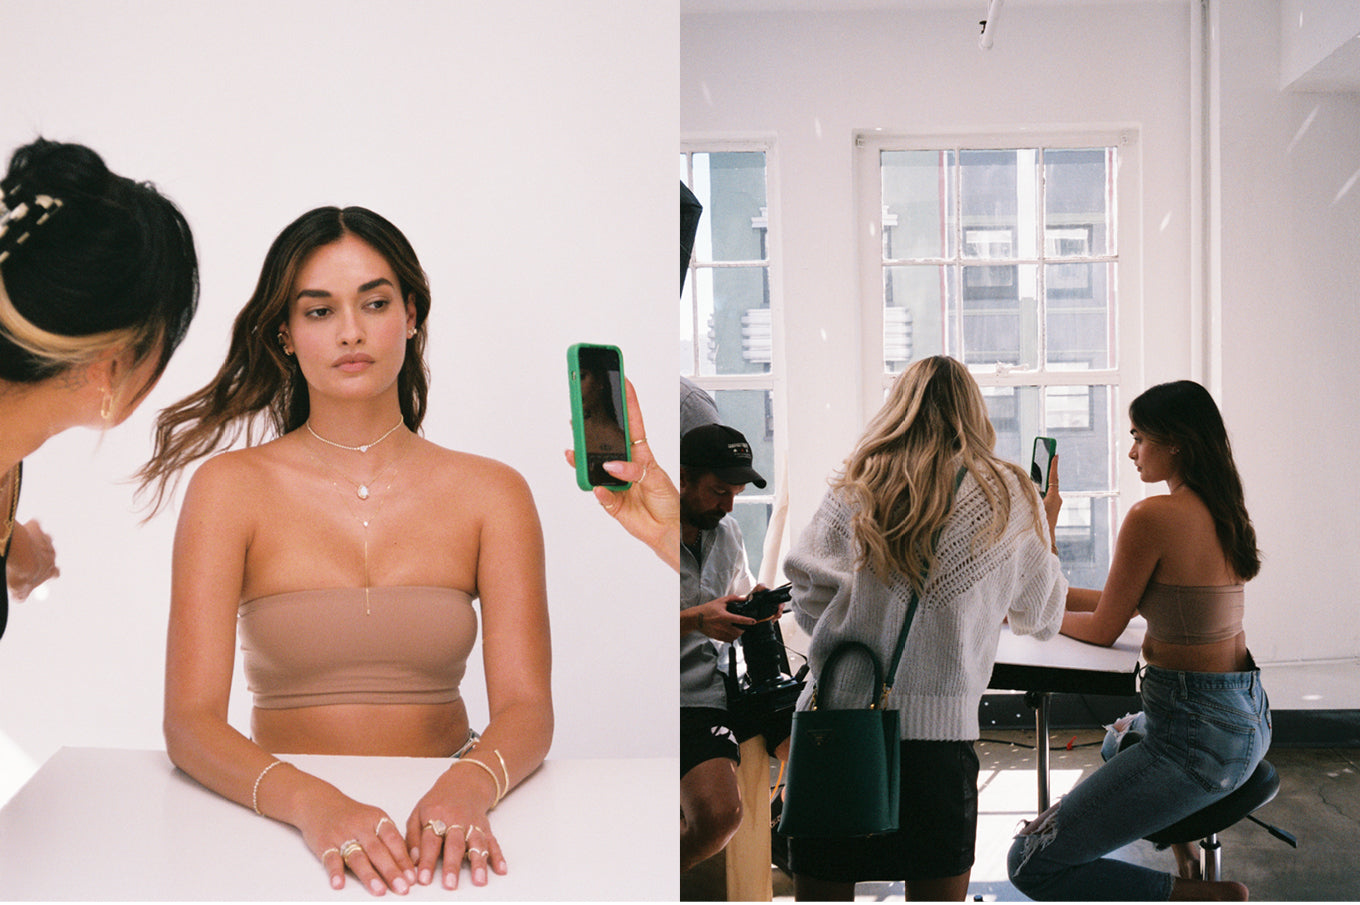 Film BTS photos of the constellation photoshoot, models in fram getting hair fixed